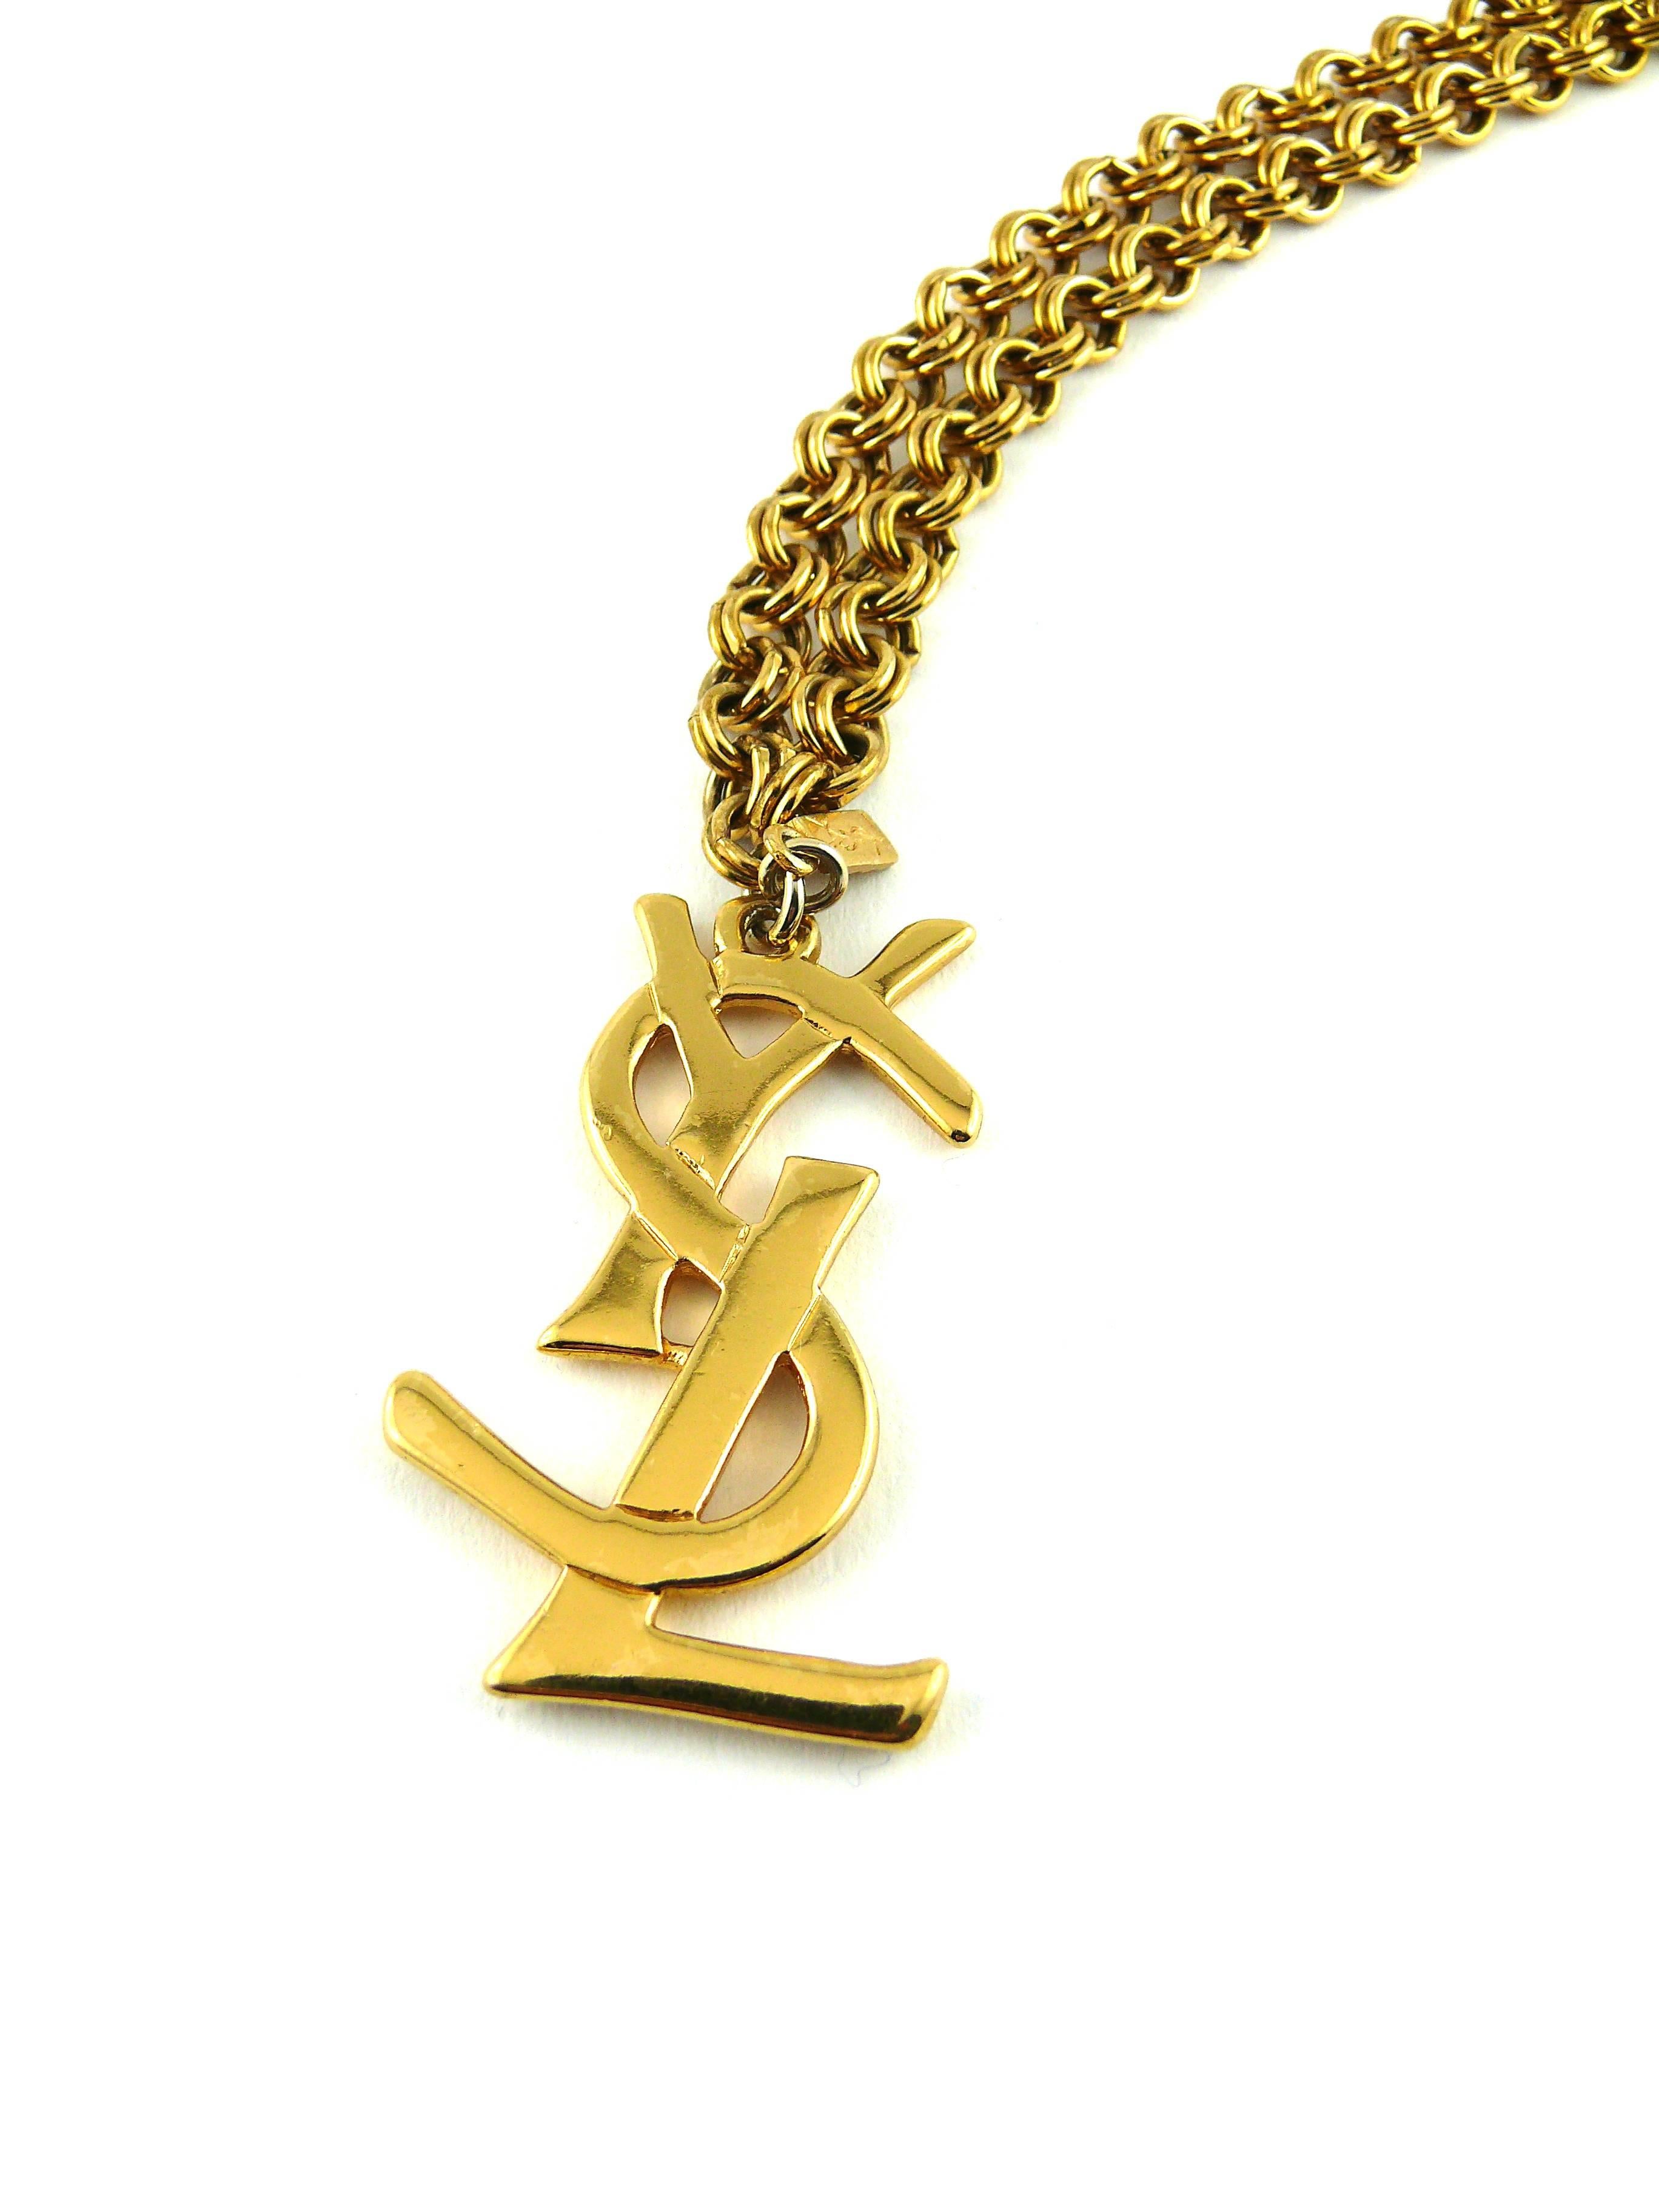 YVES SAINT LAURENT vintage chunky gold tone chain necklace featuring a large iconic YSL logo.

"Love" heart clasp.

Embossed YVES SAINT LAURENT Made in France on the clasp.
Hanging tag YSL Made in France close to the logo